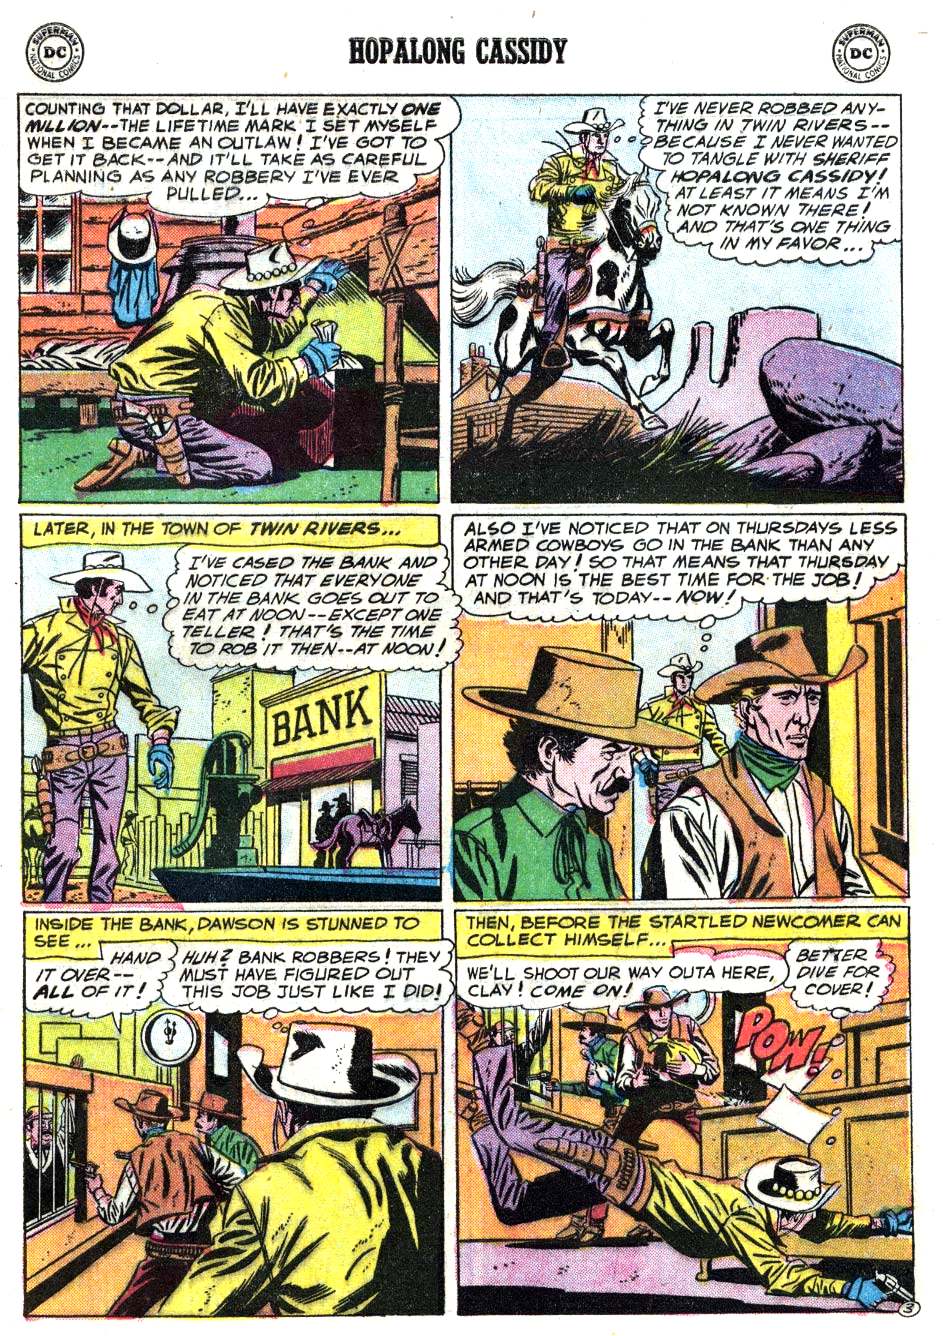 Read online Hopalong Cassidy comic -  Issue #123 - 5